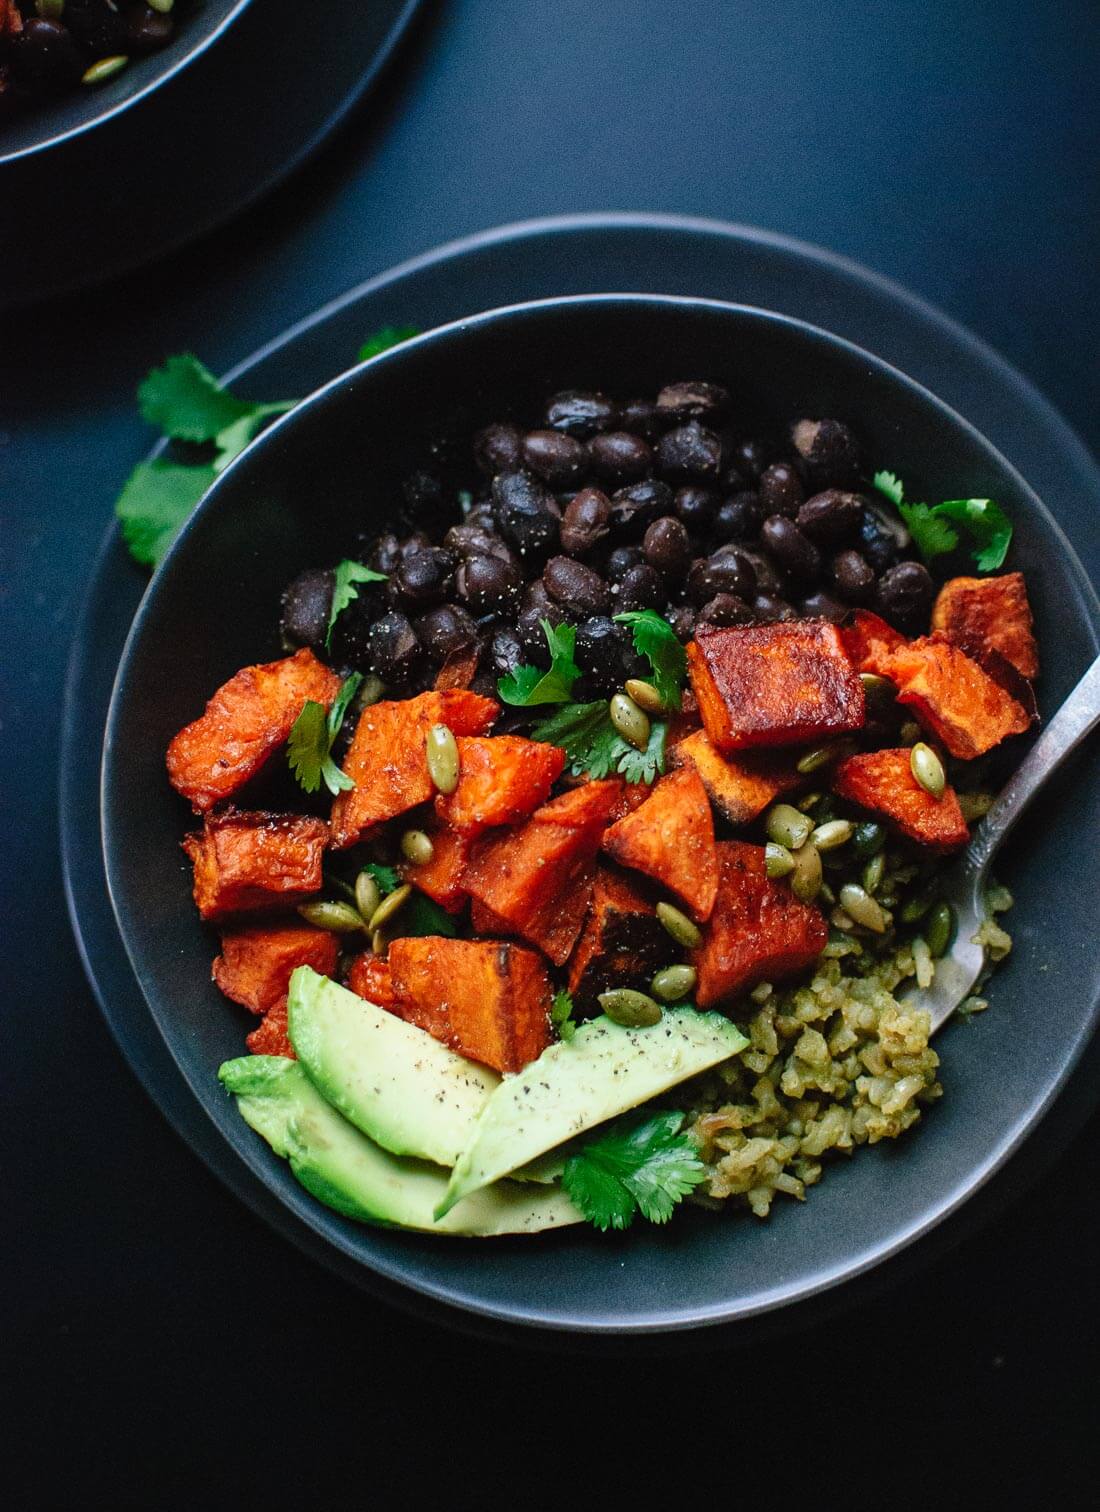 Roasted sweet potatoes with green rice and black beans. cookieandkate.com